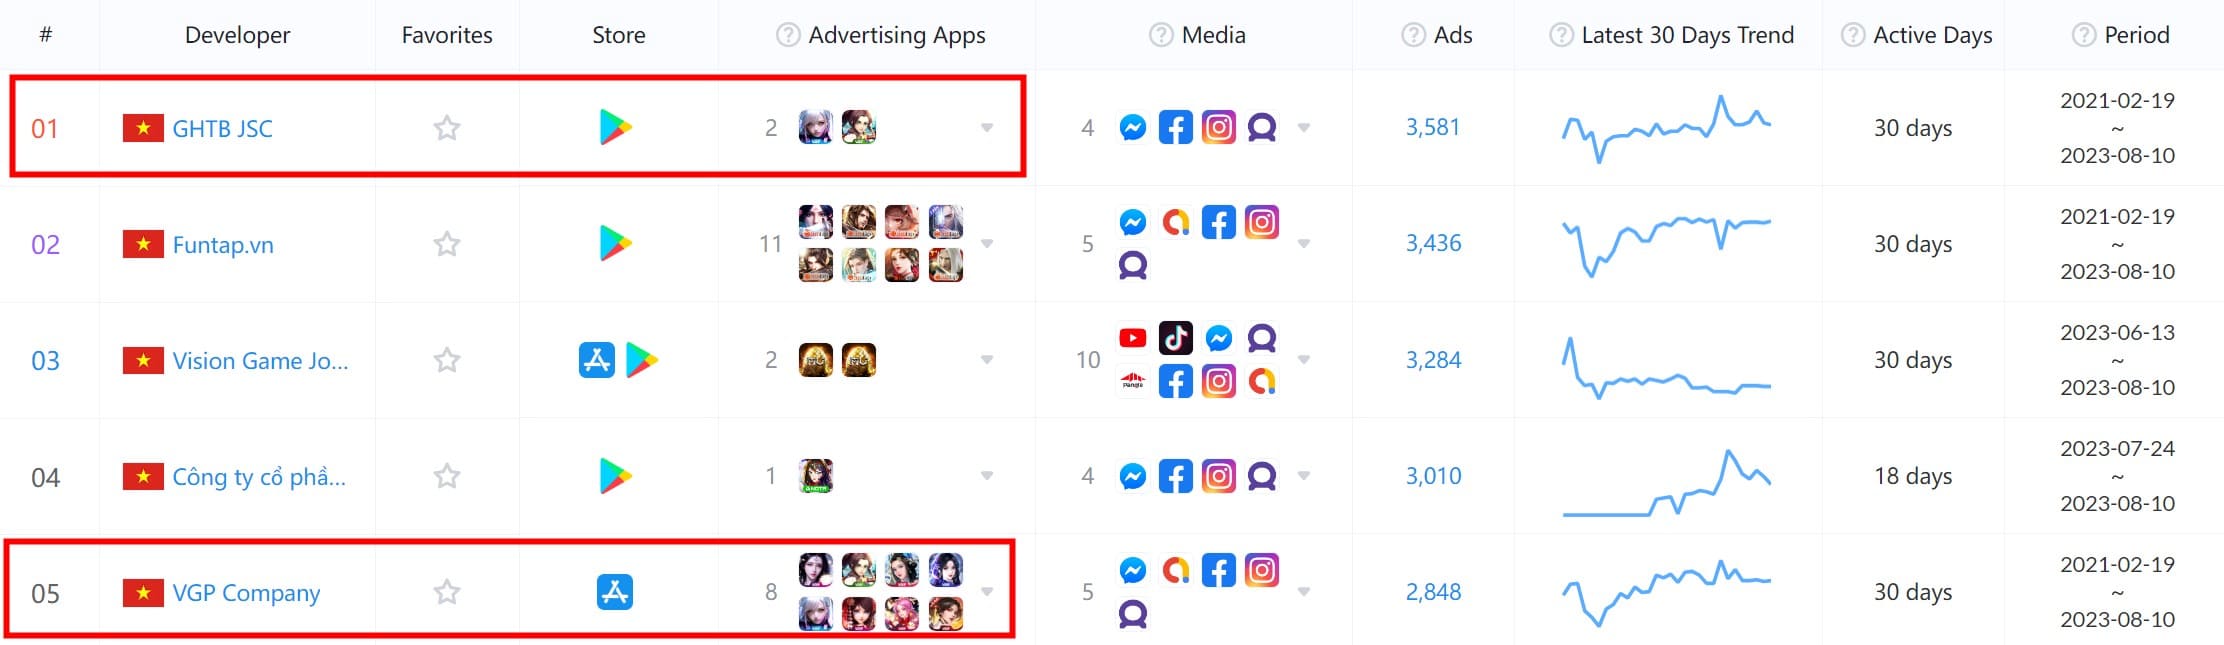 According to AppGrowing, massive advertising made VGP the most advertised Vietnamese developer in the last 30 days.